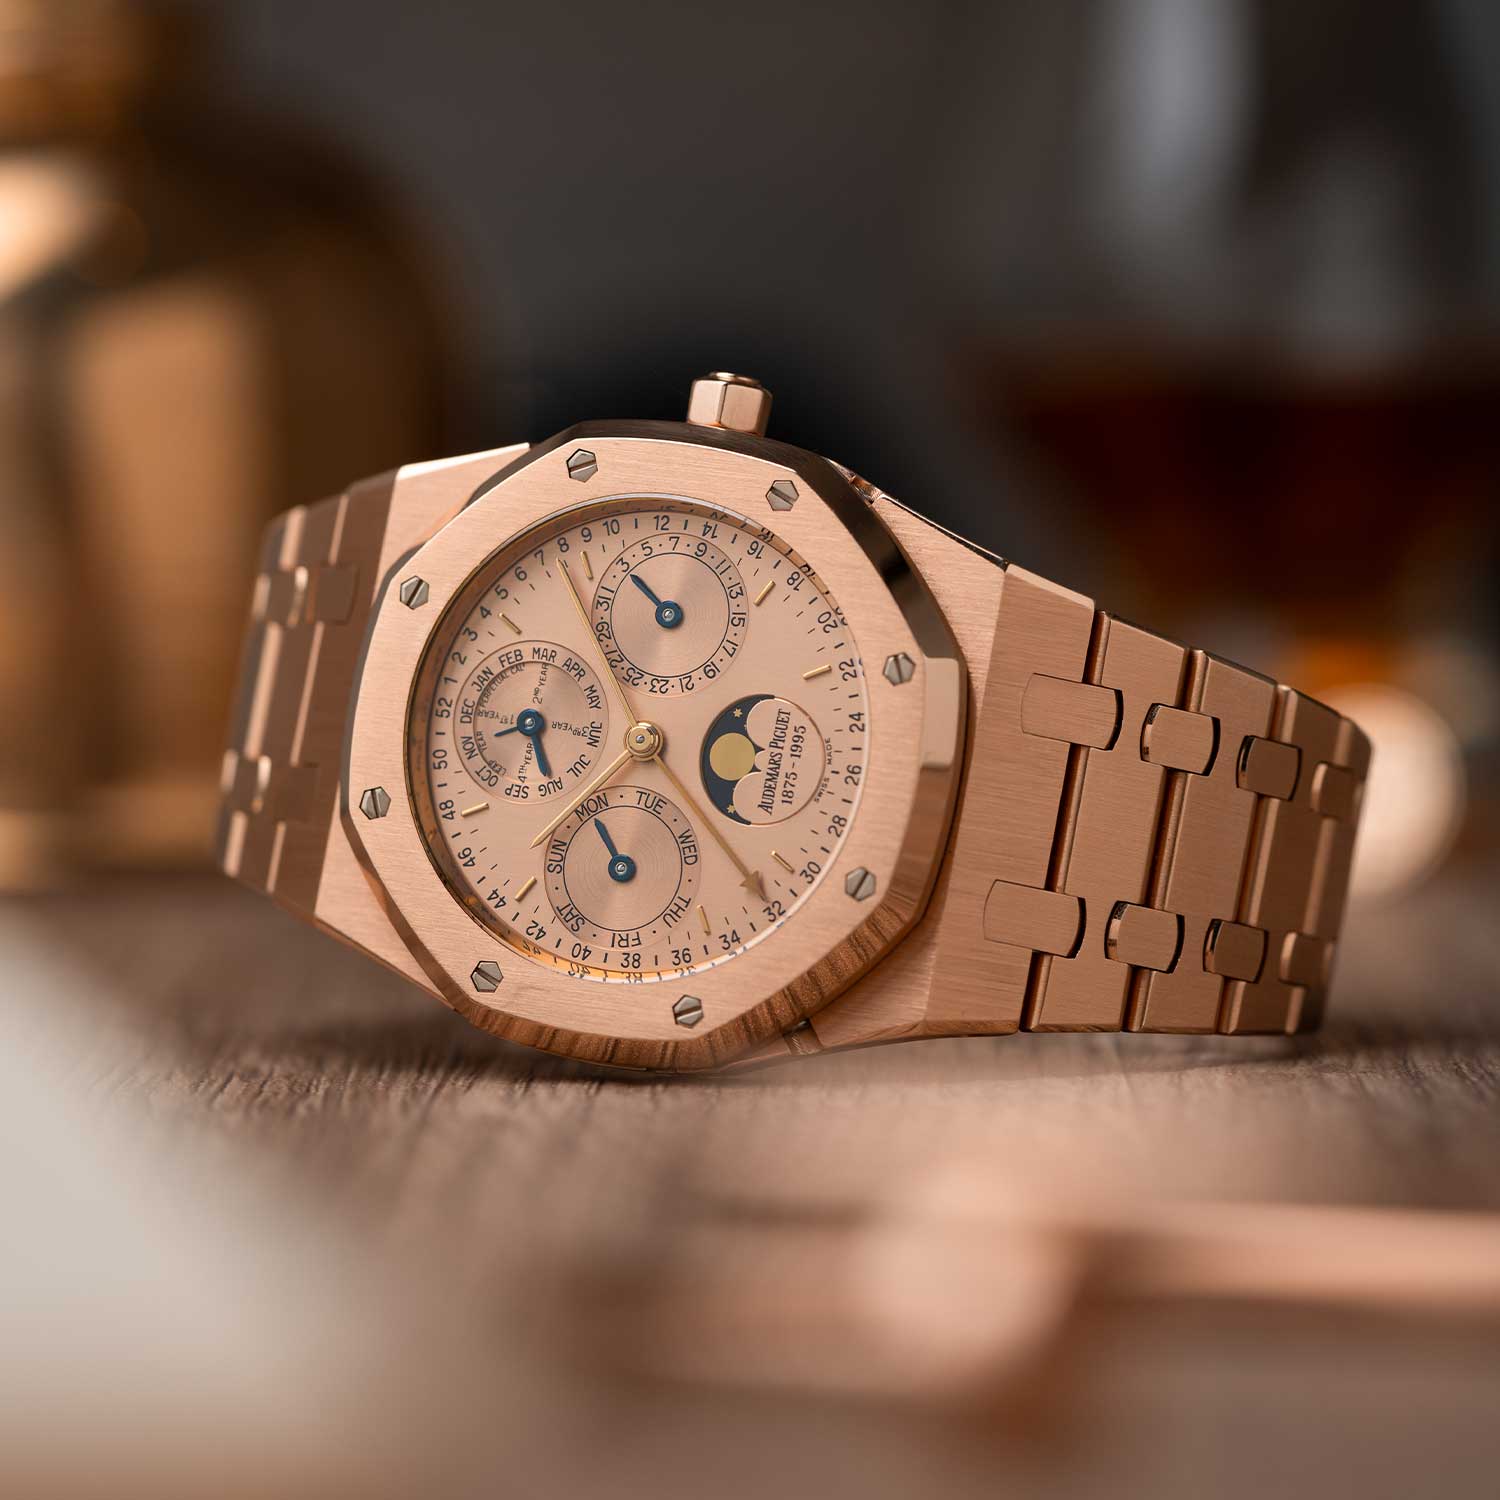 In 1995, Audemars Piguet celebrated its 120th anniversary with the limited edition ref. 25810.OR.01; the watch ushers in the reappearance of the leap-year indicator coaxially mounted with the month hand in the subdial at 12 o’clock; similar to the the leap-year cycle, in exactly the same font as that in the second-series 5516 watches; the watch seen here is presently part of the Pygmalion Gallery's private collection (Image: Photo and watch, property of Pygmalion Gallery)